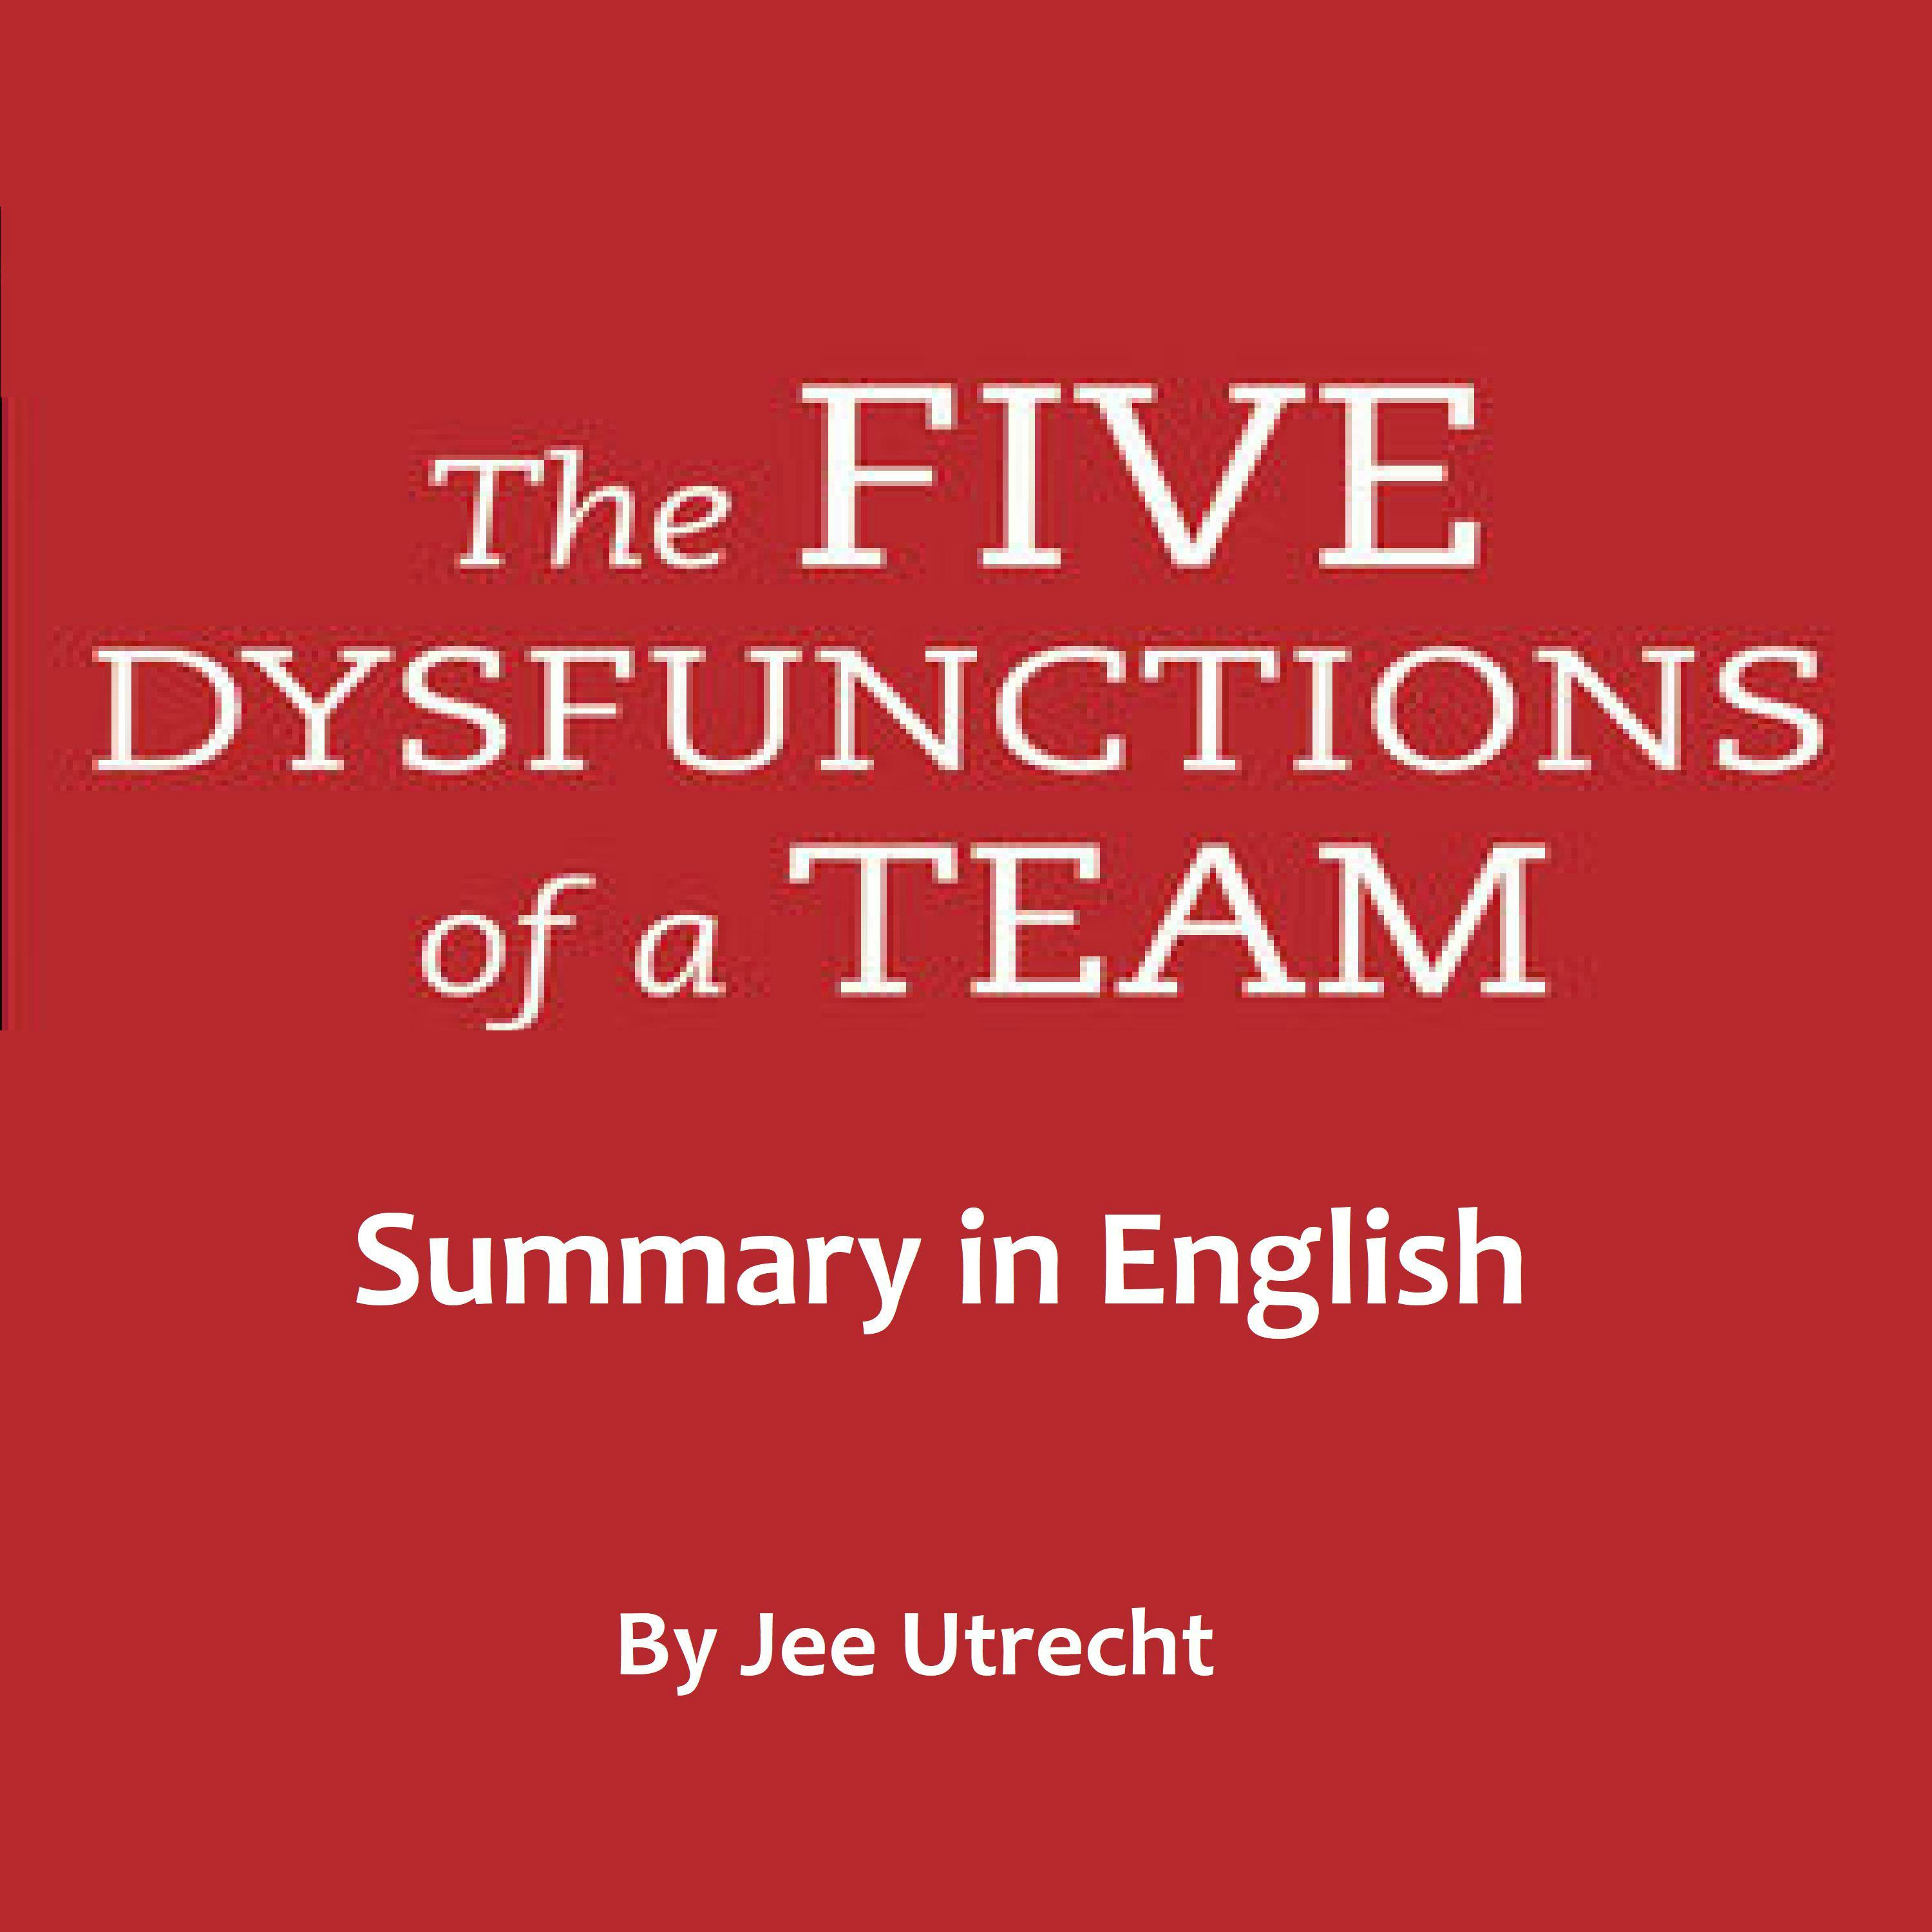 The five dysfunctions of a team - Summary in English: Separated into chapters summaries - undefined